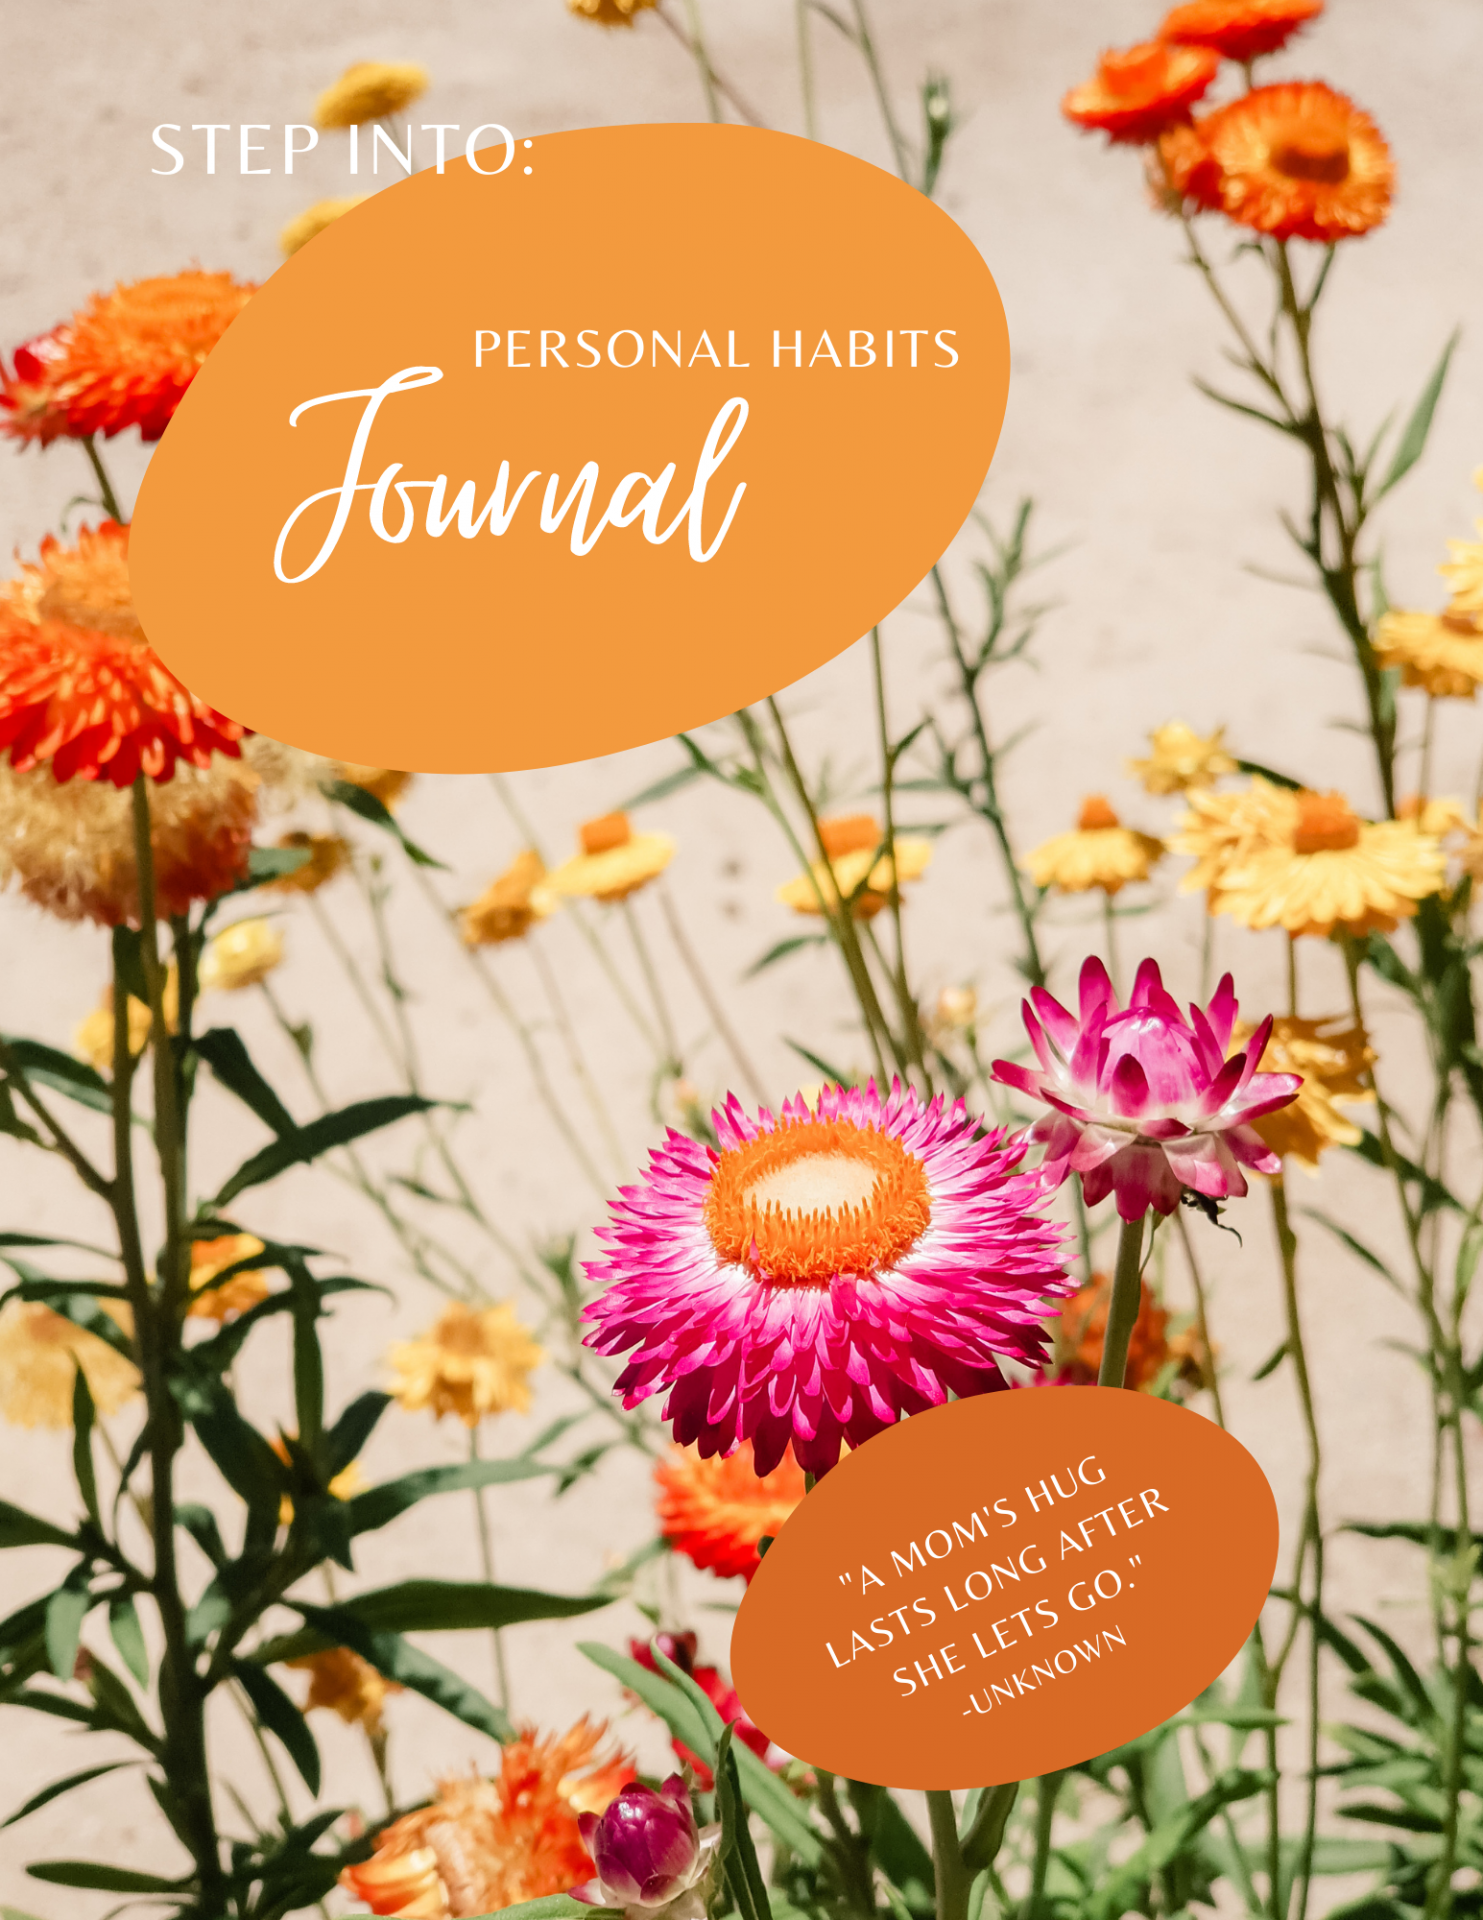 Personal habits journal cover